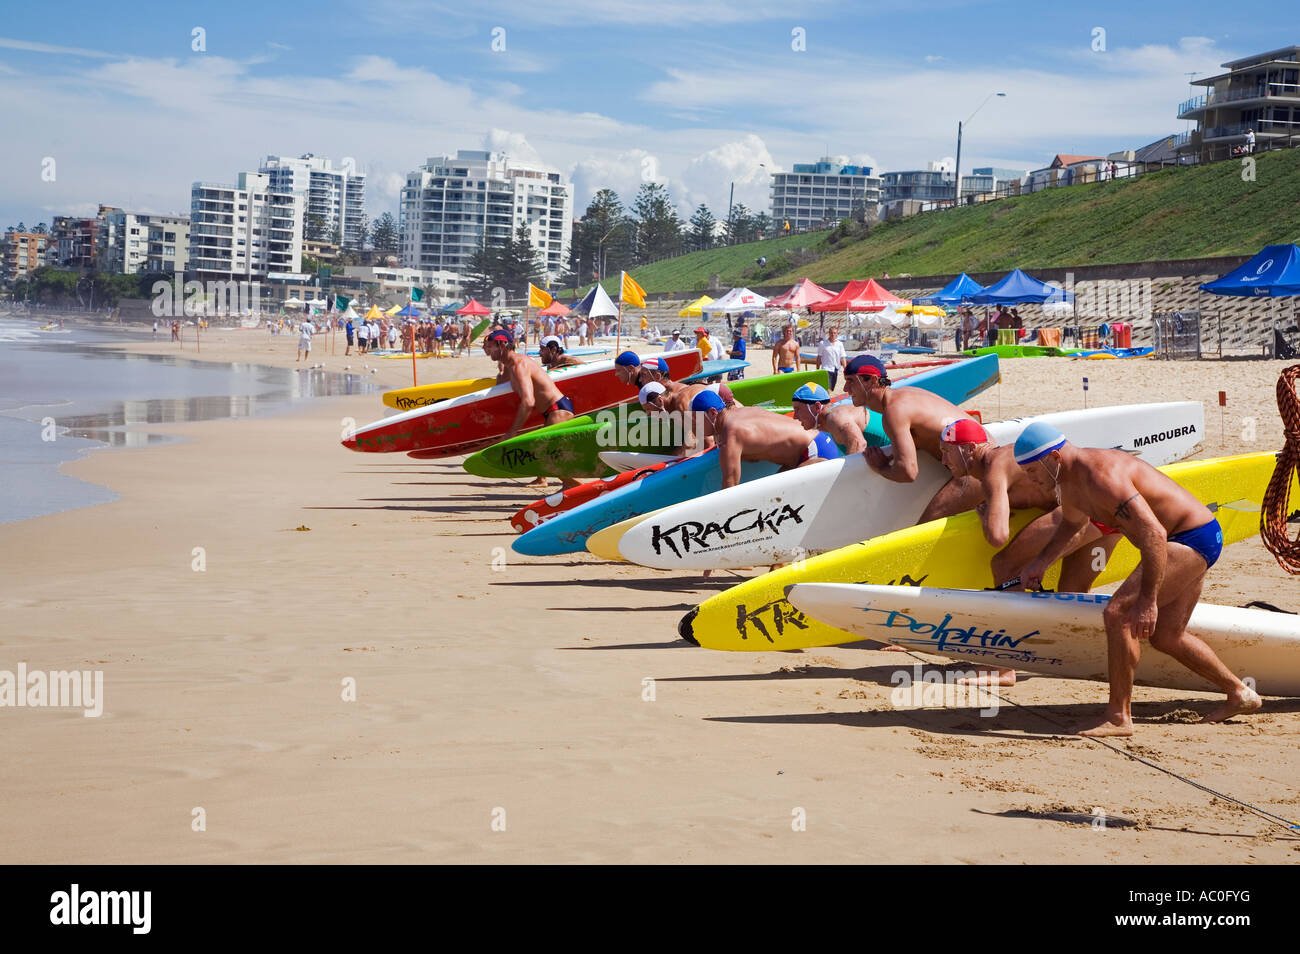 Competitors line up for the start of a rescue board race on Cronulla Beach Stock Photo